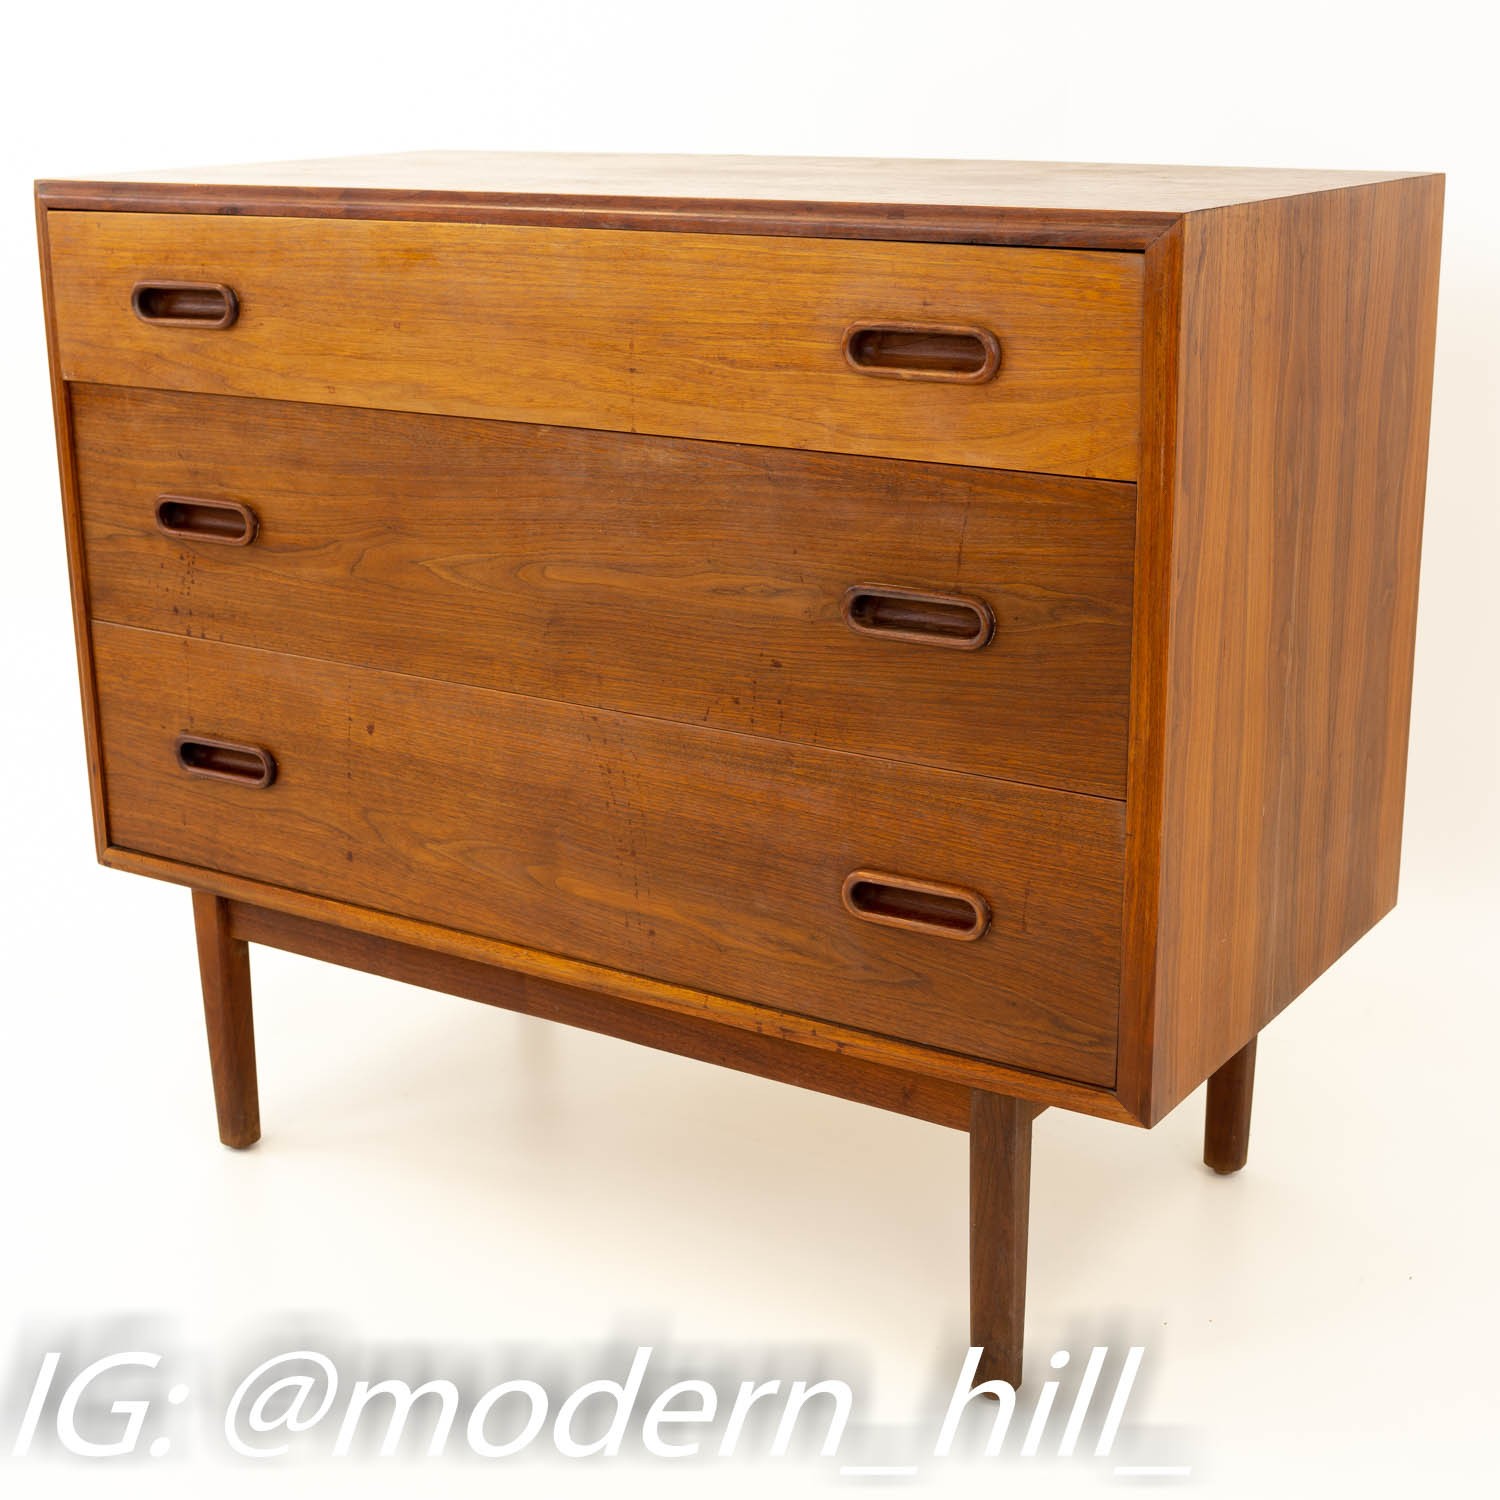 Jack Cartwright for Founders Mid Century Modern Danish Style 3 Drawer Chest of Drawers - Matching Pair